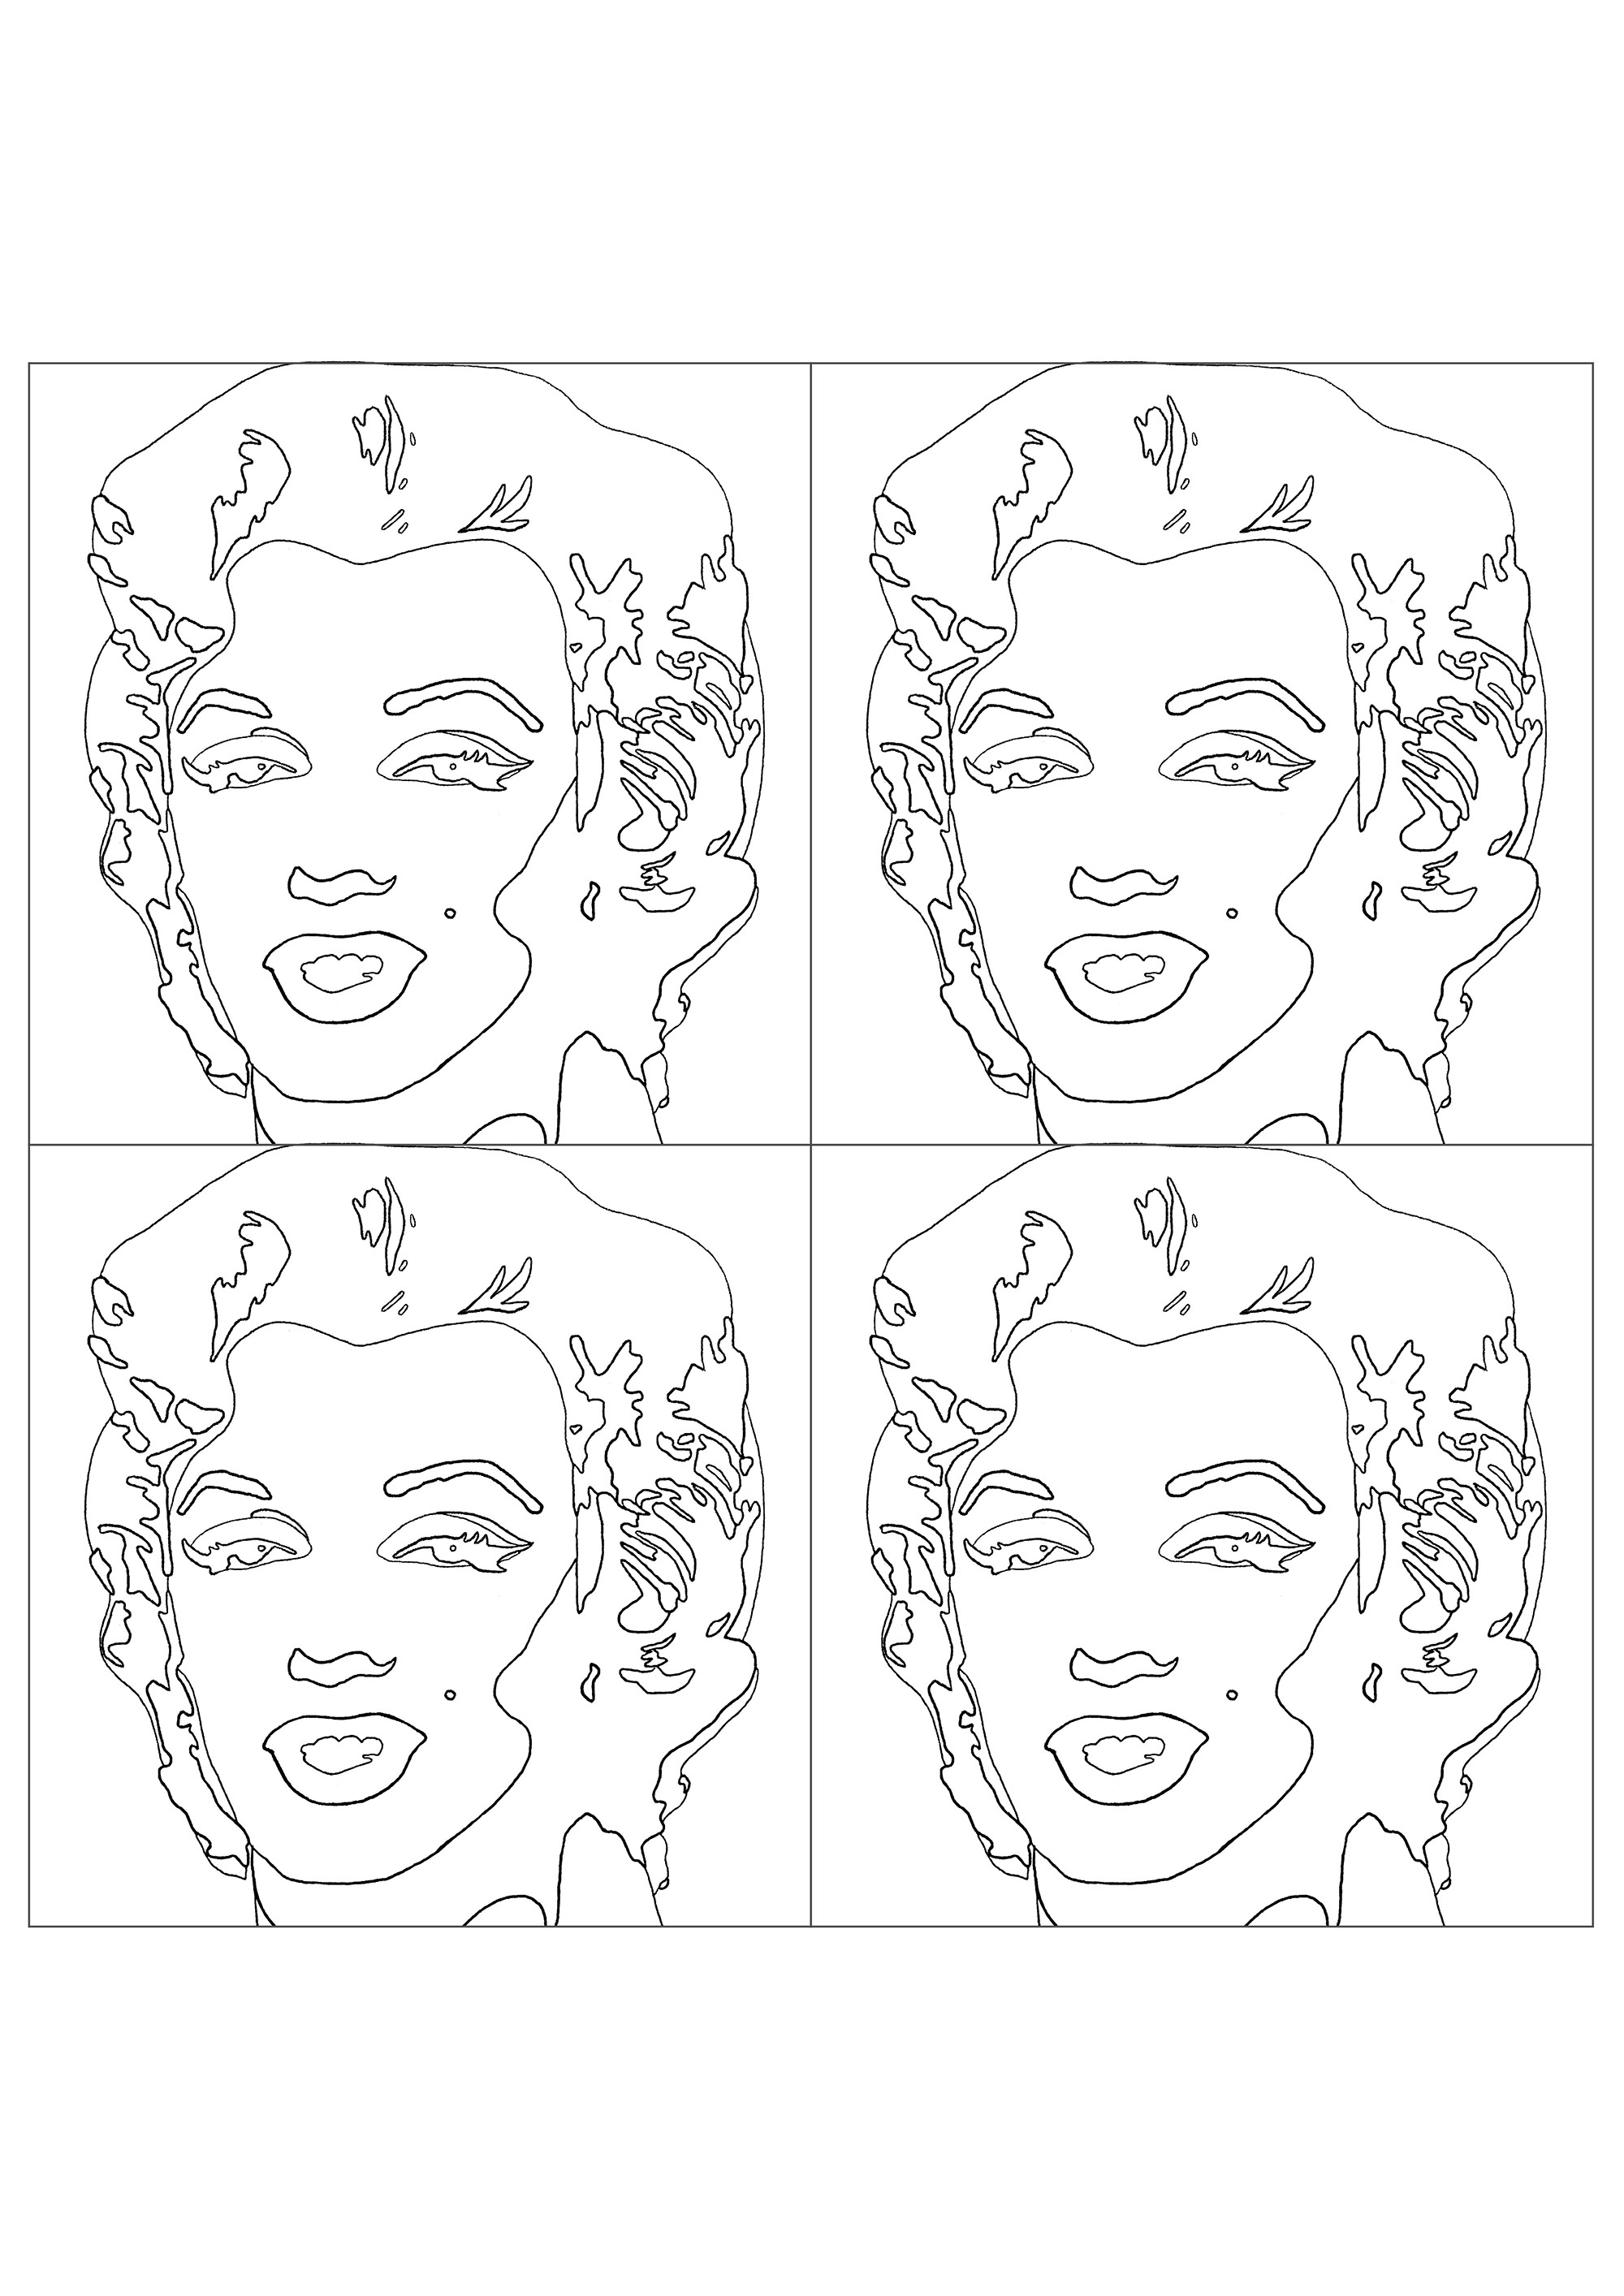 andy-warhol-shot-sage-blue-marilyn-version-with-four-portraits